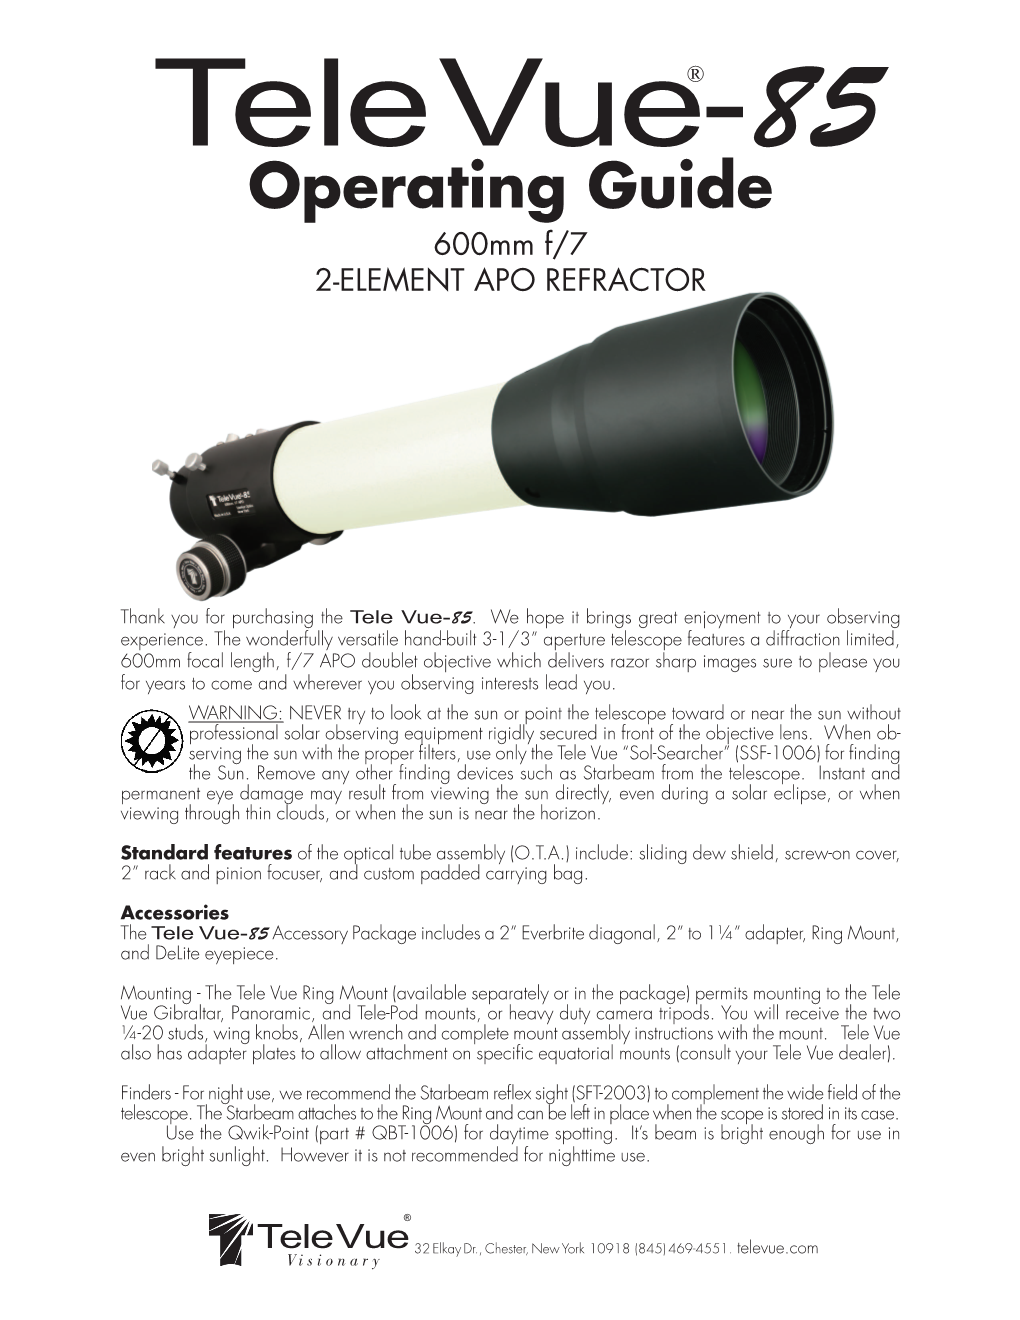 Tele Vue-85 Operating Guide